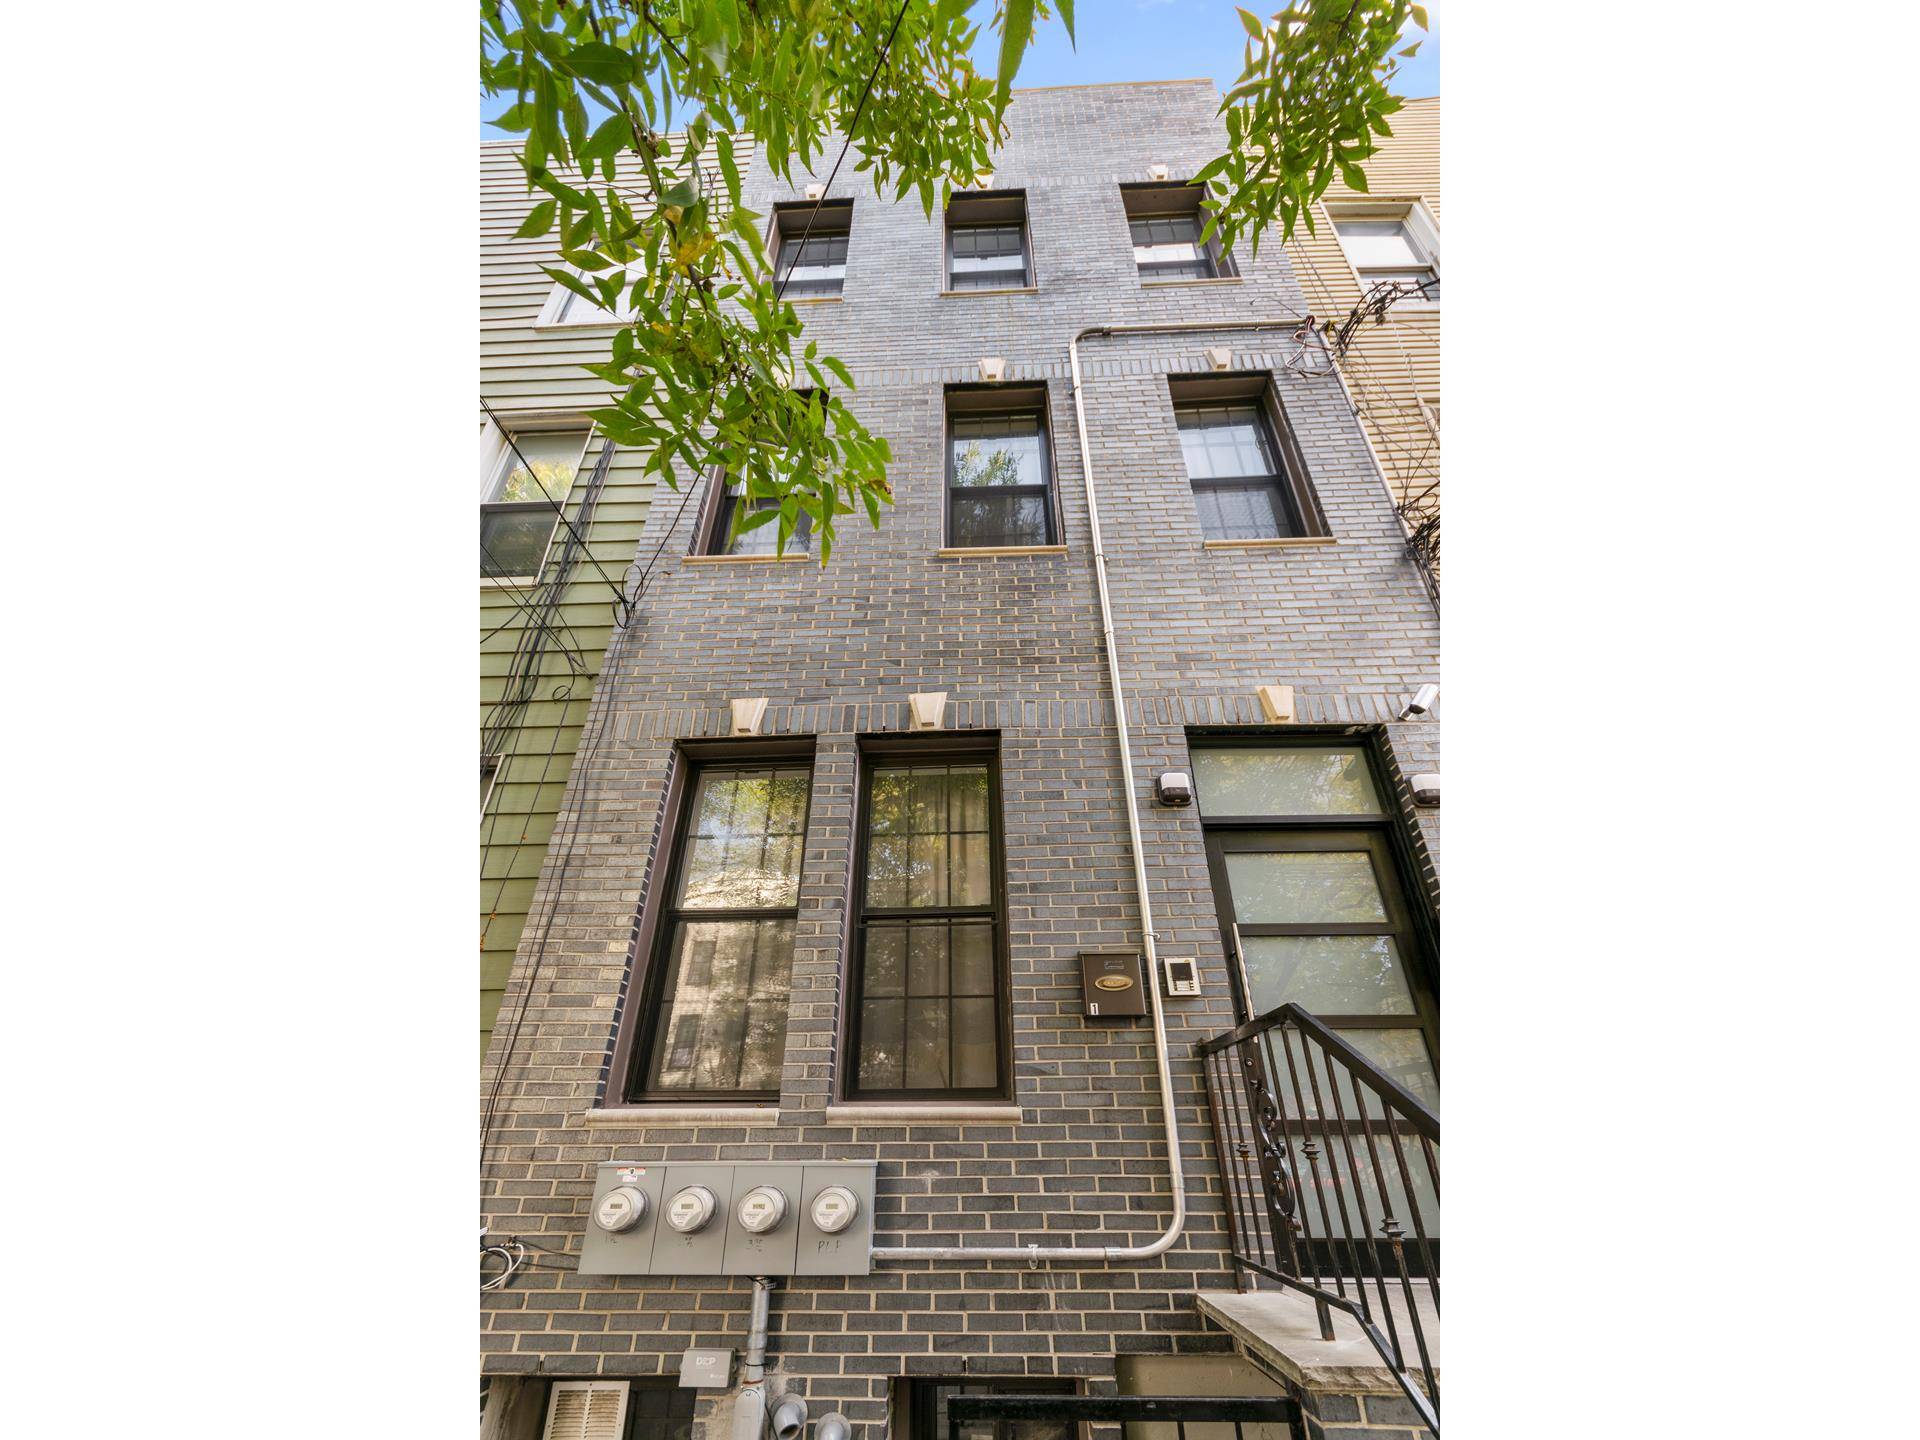 Douglas Elliman is pleased to offer 352 Menahan St, located in Bushwick section of Brooklyn, New York.